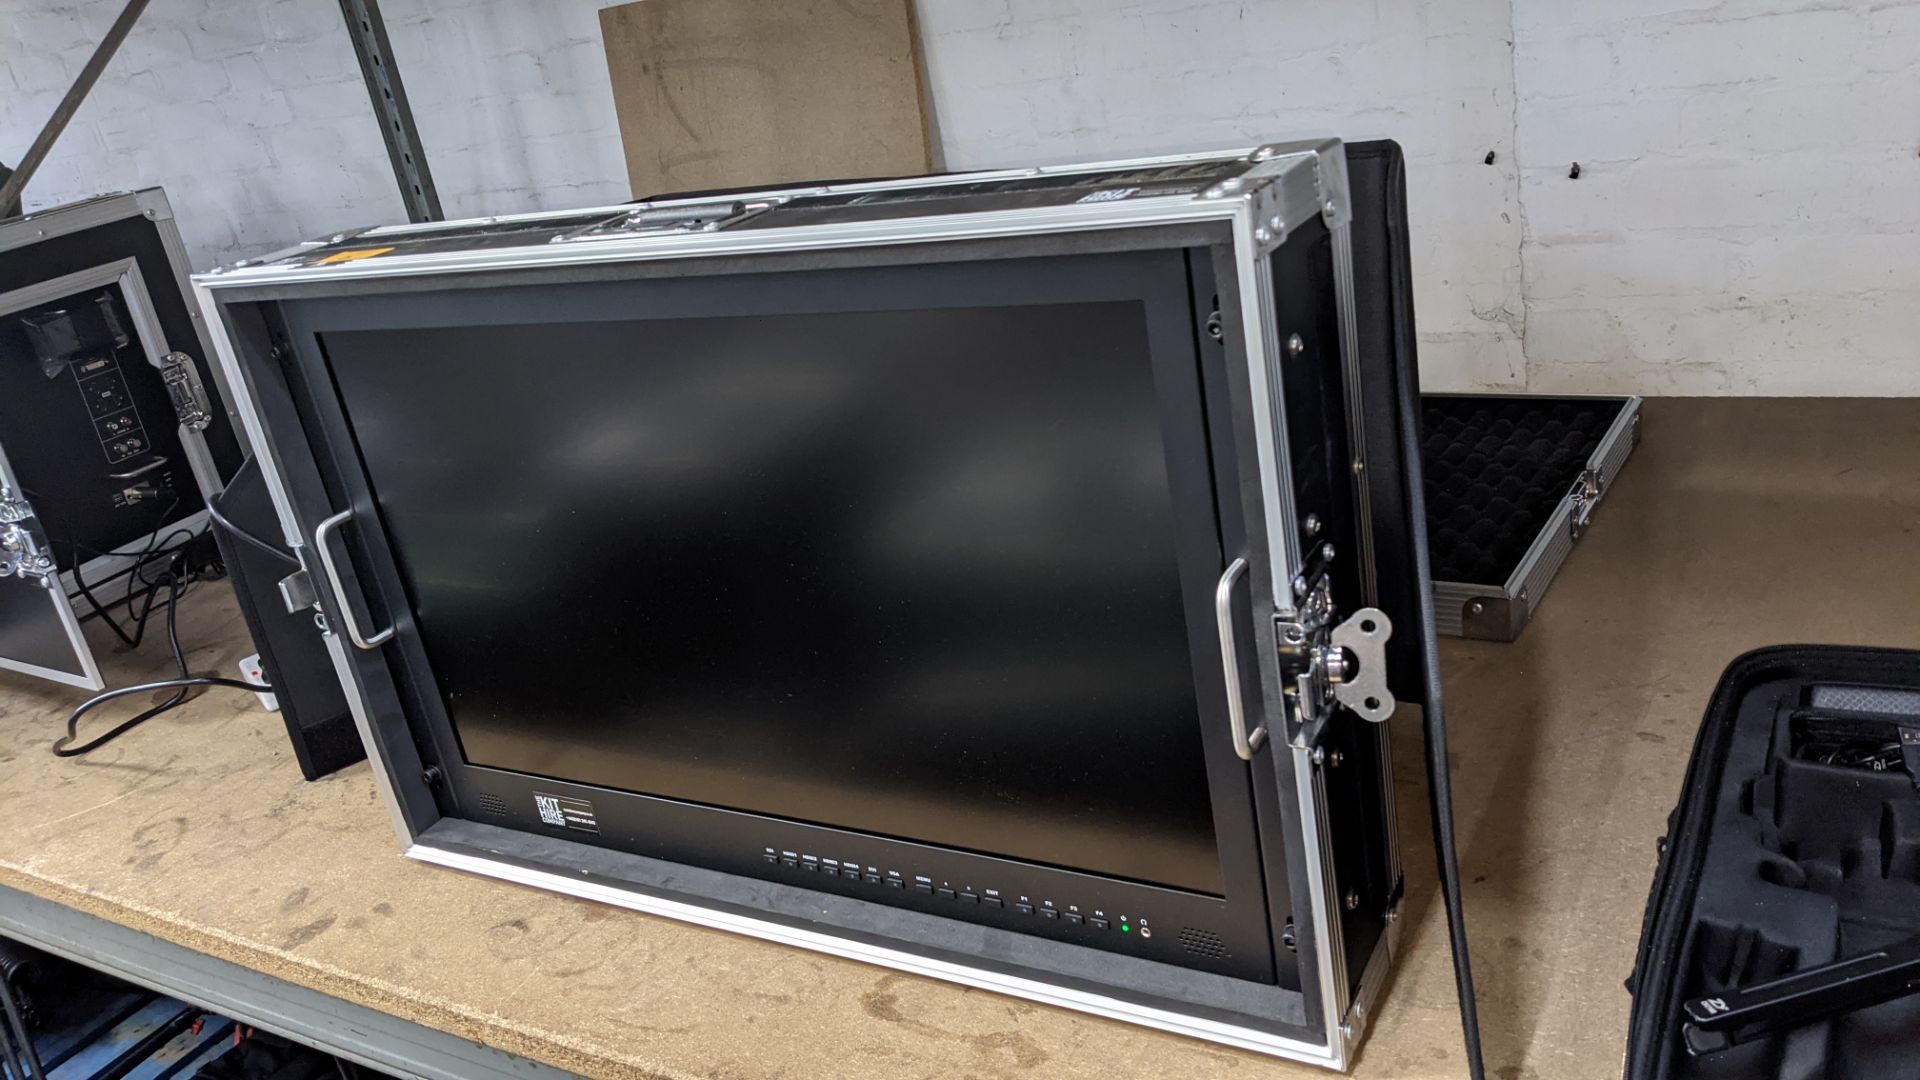 Lilliput BM280-4KS: 28" 4K widescreen field monitor with 3D LUTS and HDR, in built-in flight case - Image 13 of 13